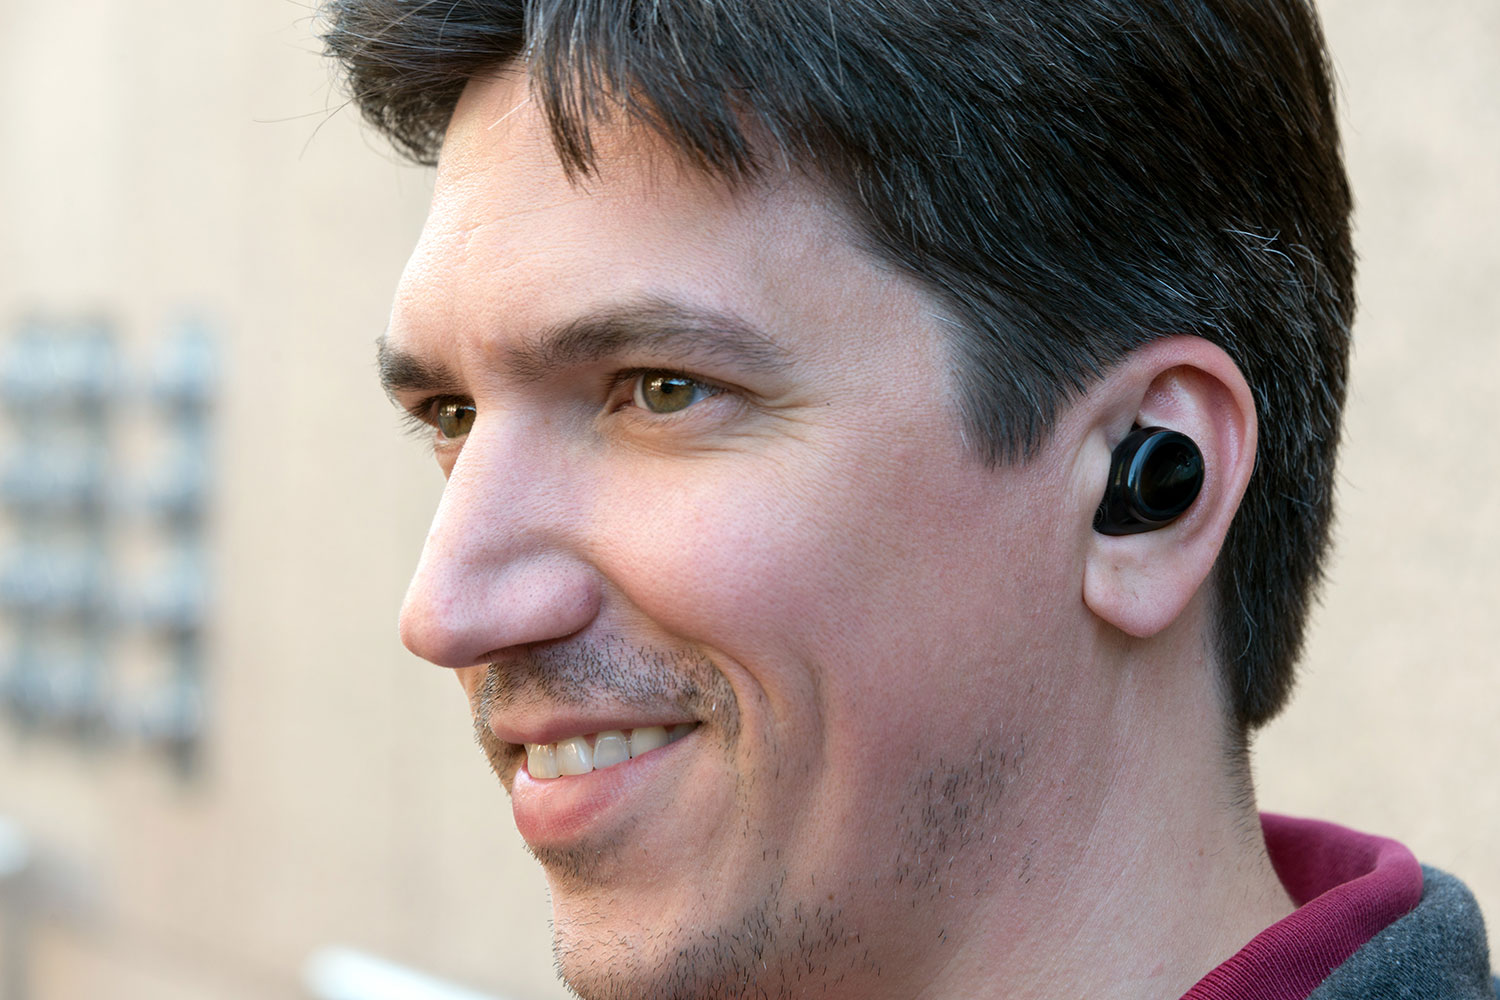 Bragi's Dash Pro Earbuds Can Translate Languages in Real Time